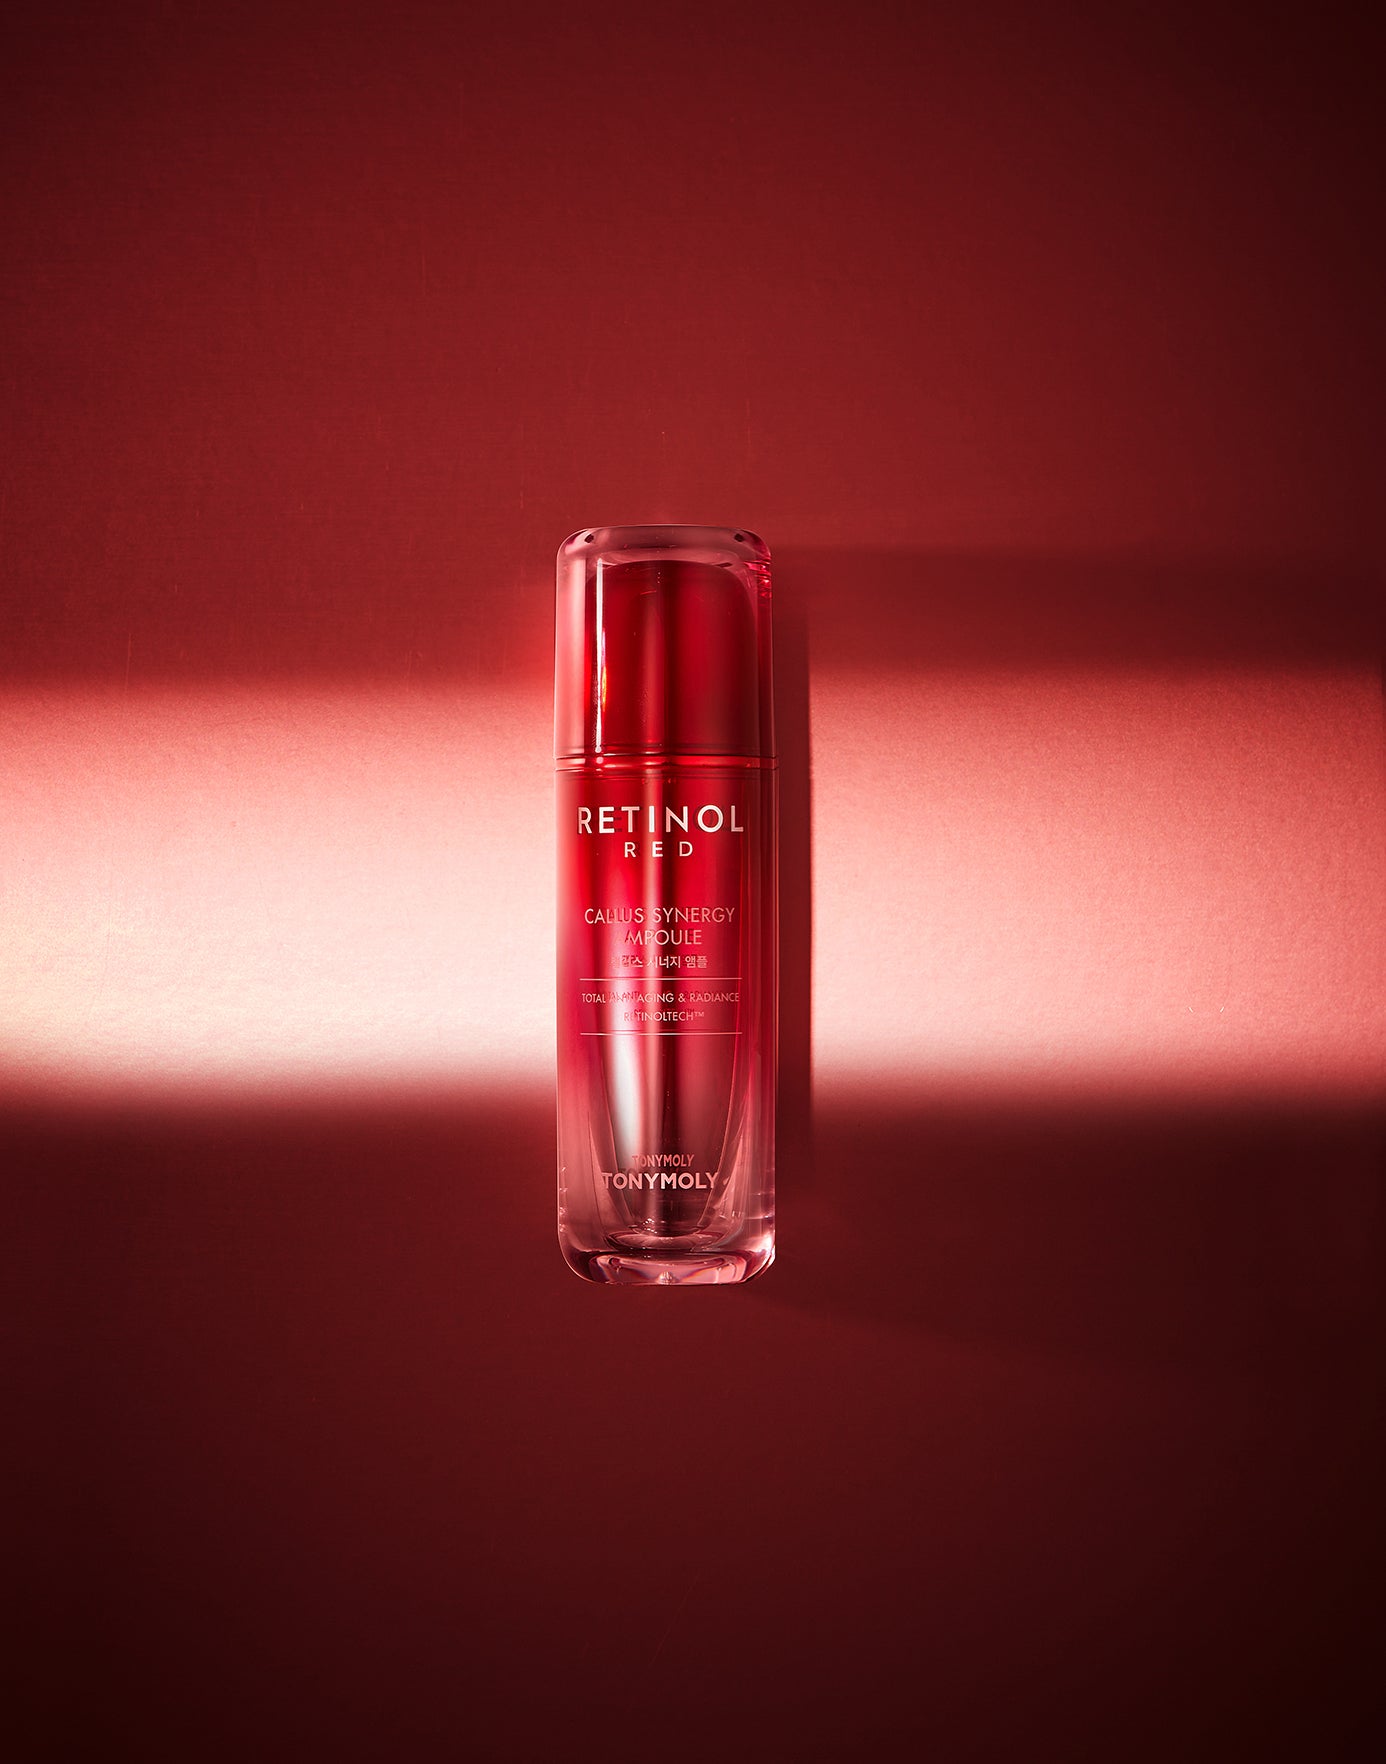 Red Retinol Callus Synergy Ampoule